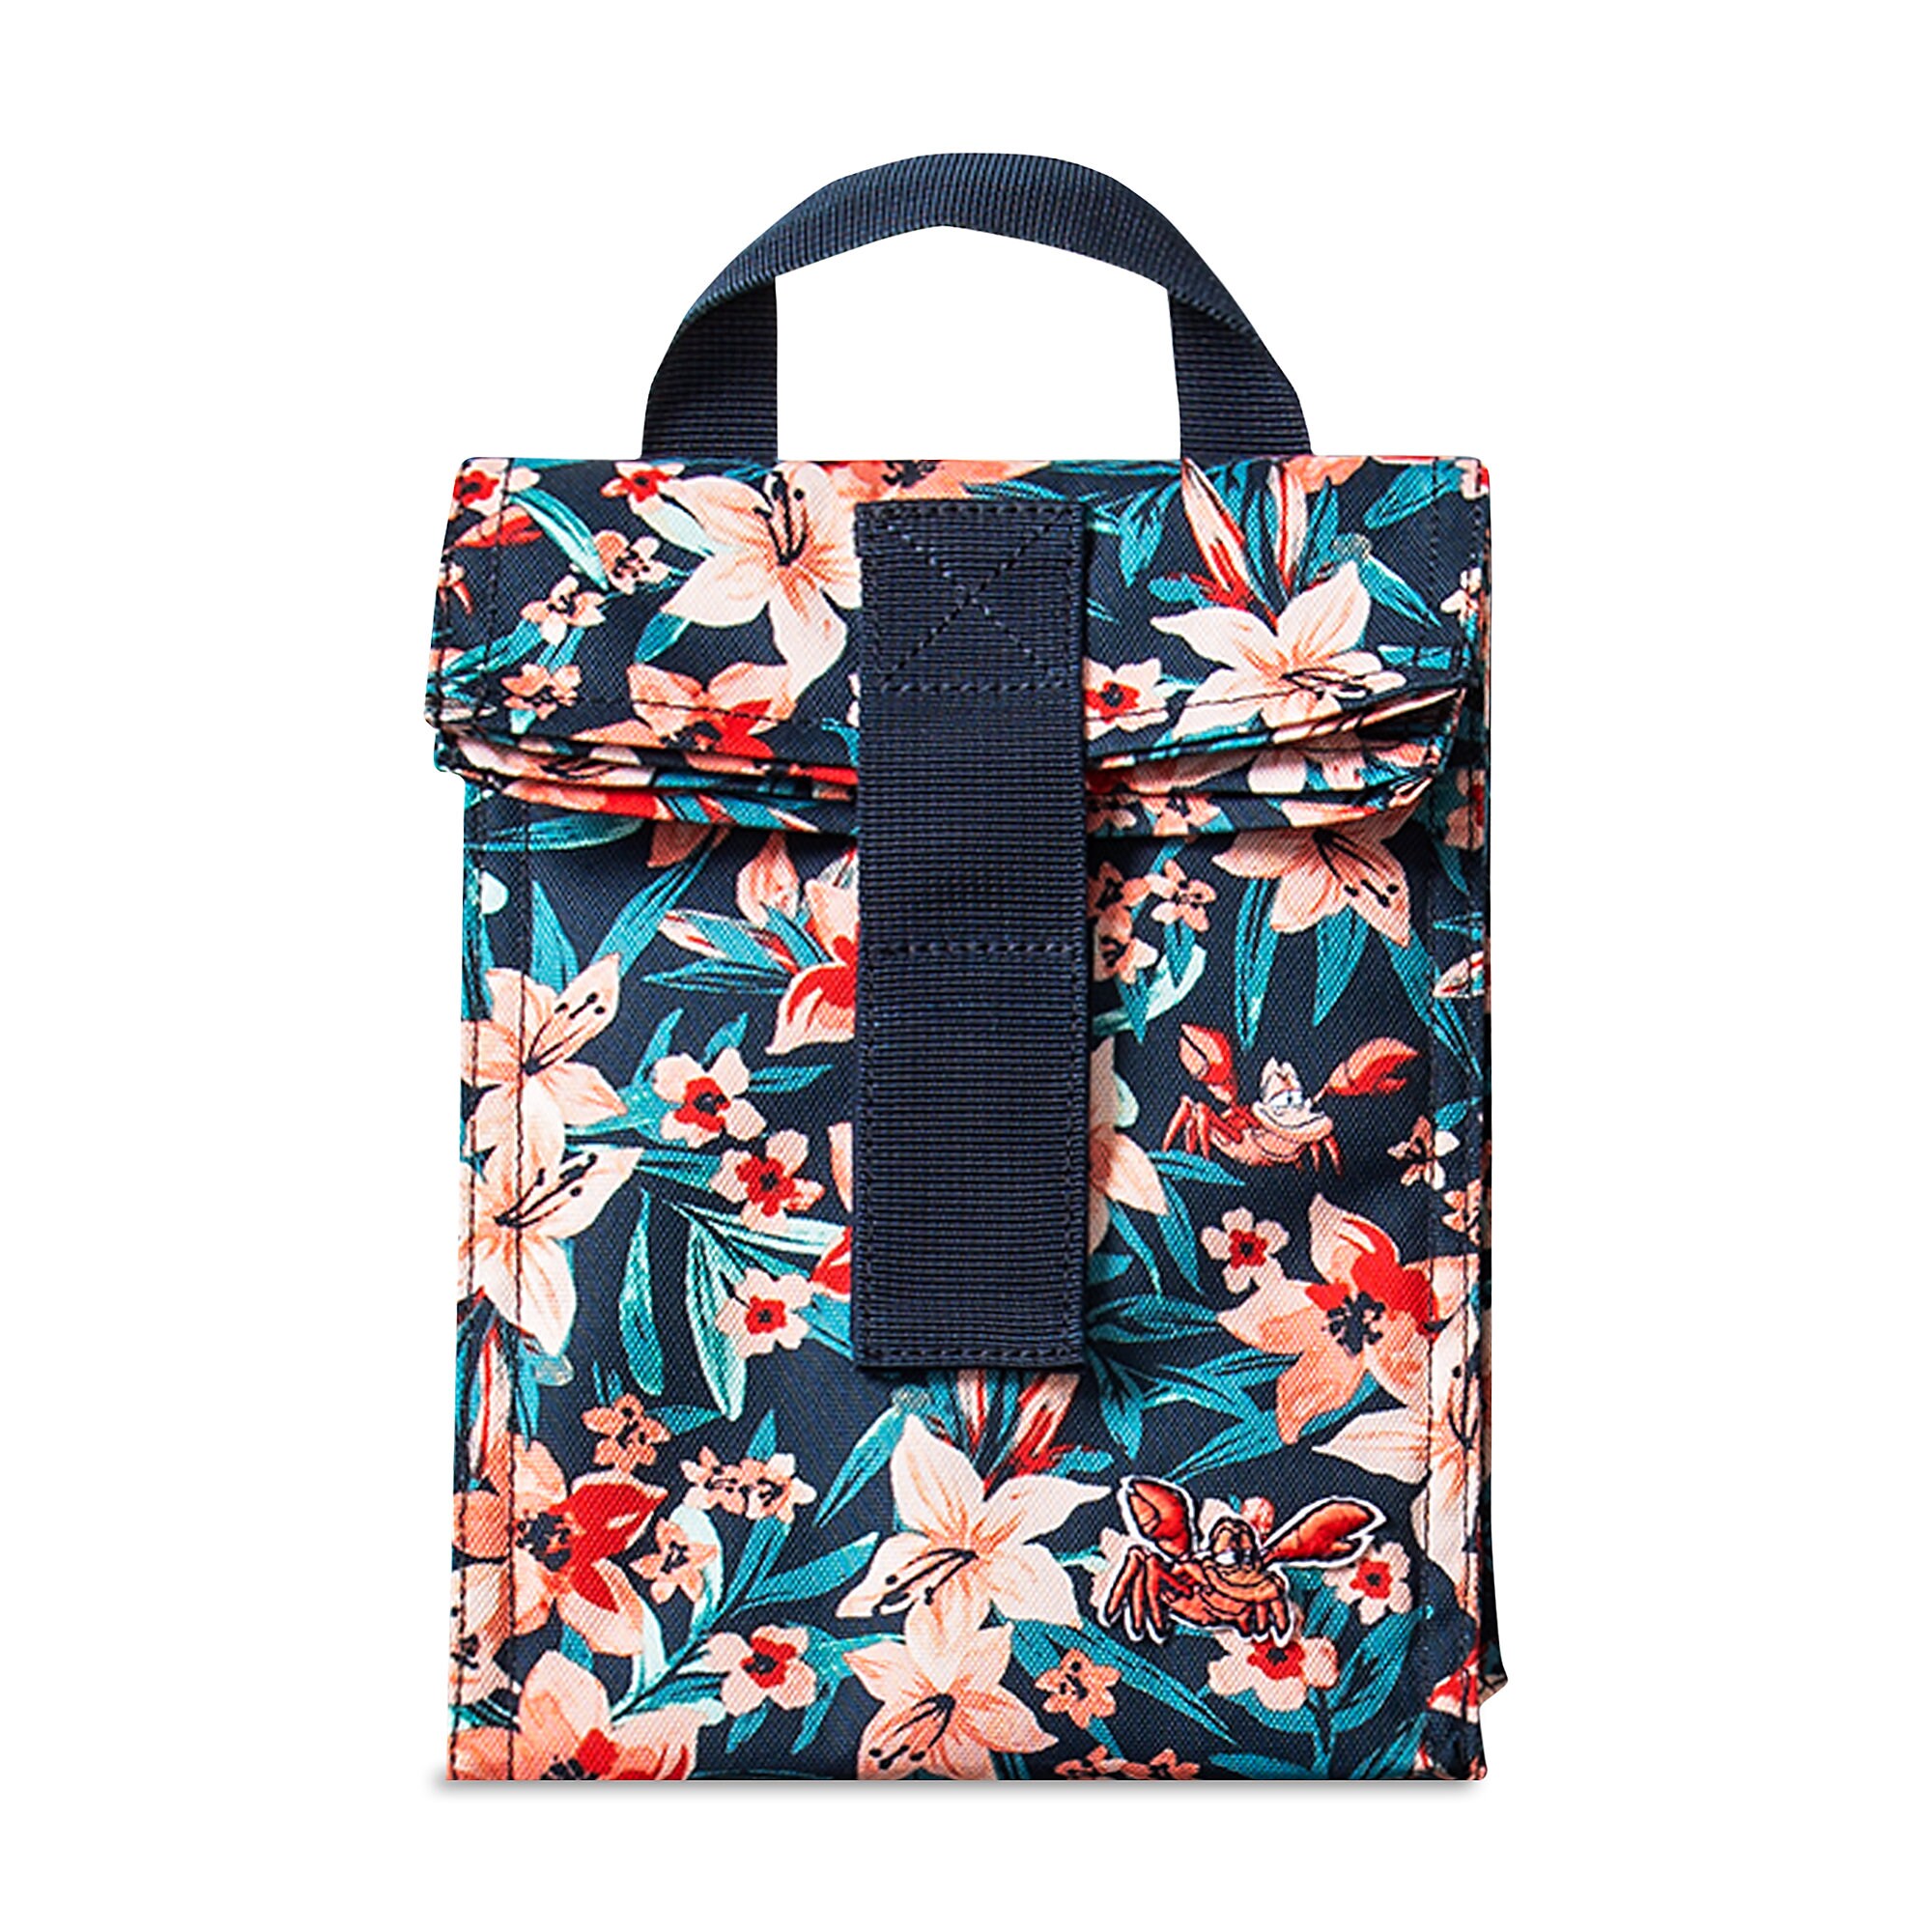 The Little Mermaid Lunch Tote by ROXY Girl